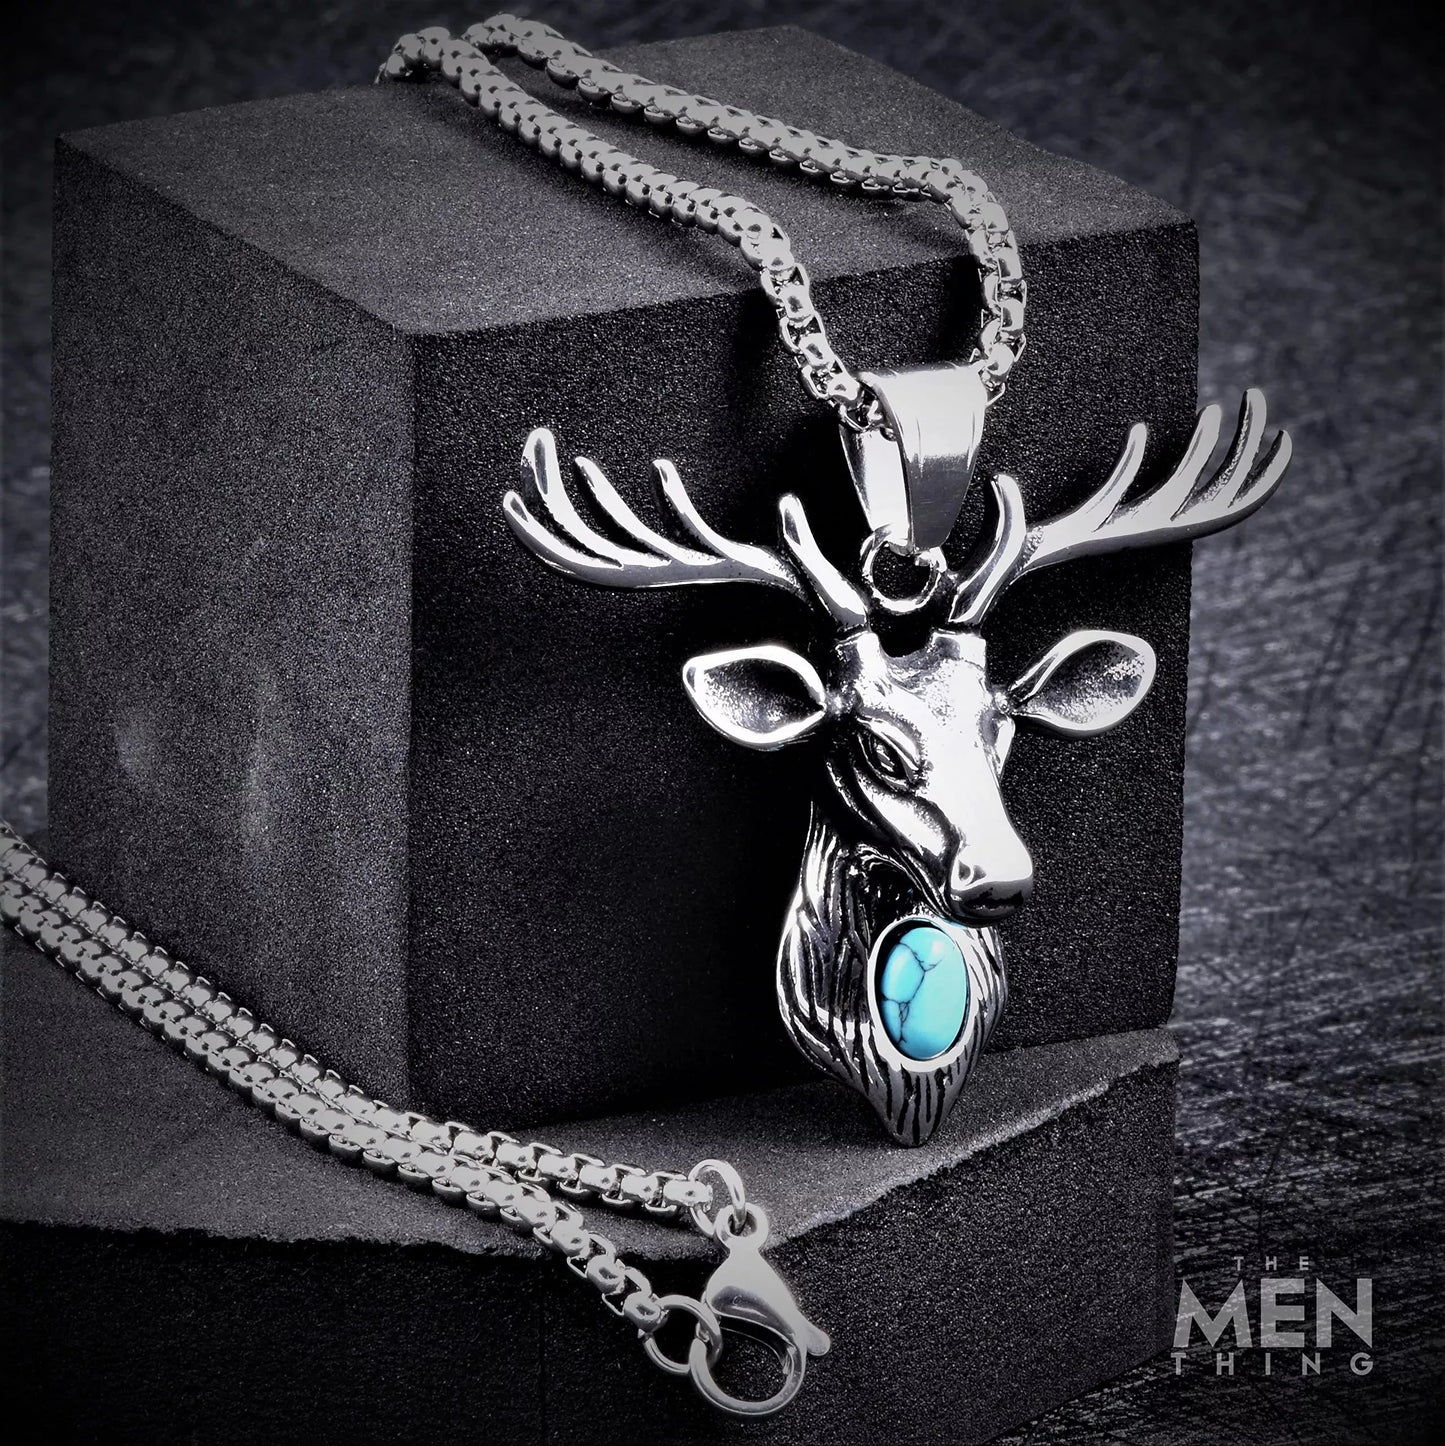 THE MEN THING Pendant for Men - Pure Titanium Steel Deer Pendant with 24inch Round Box Chain for Men & Boys